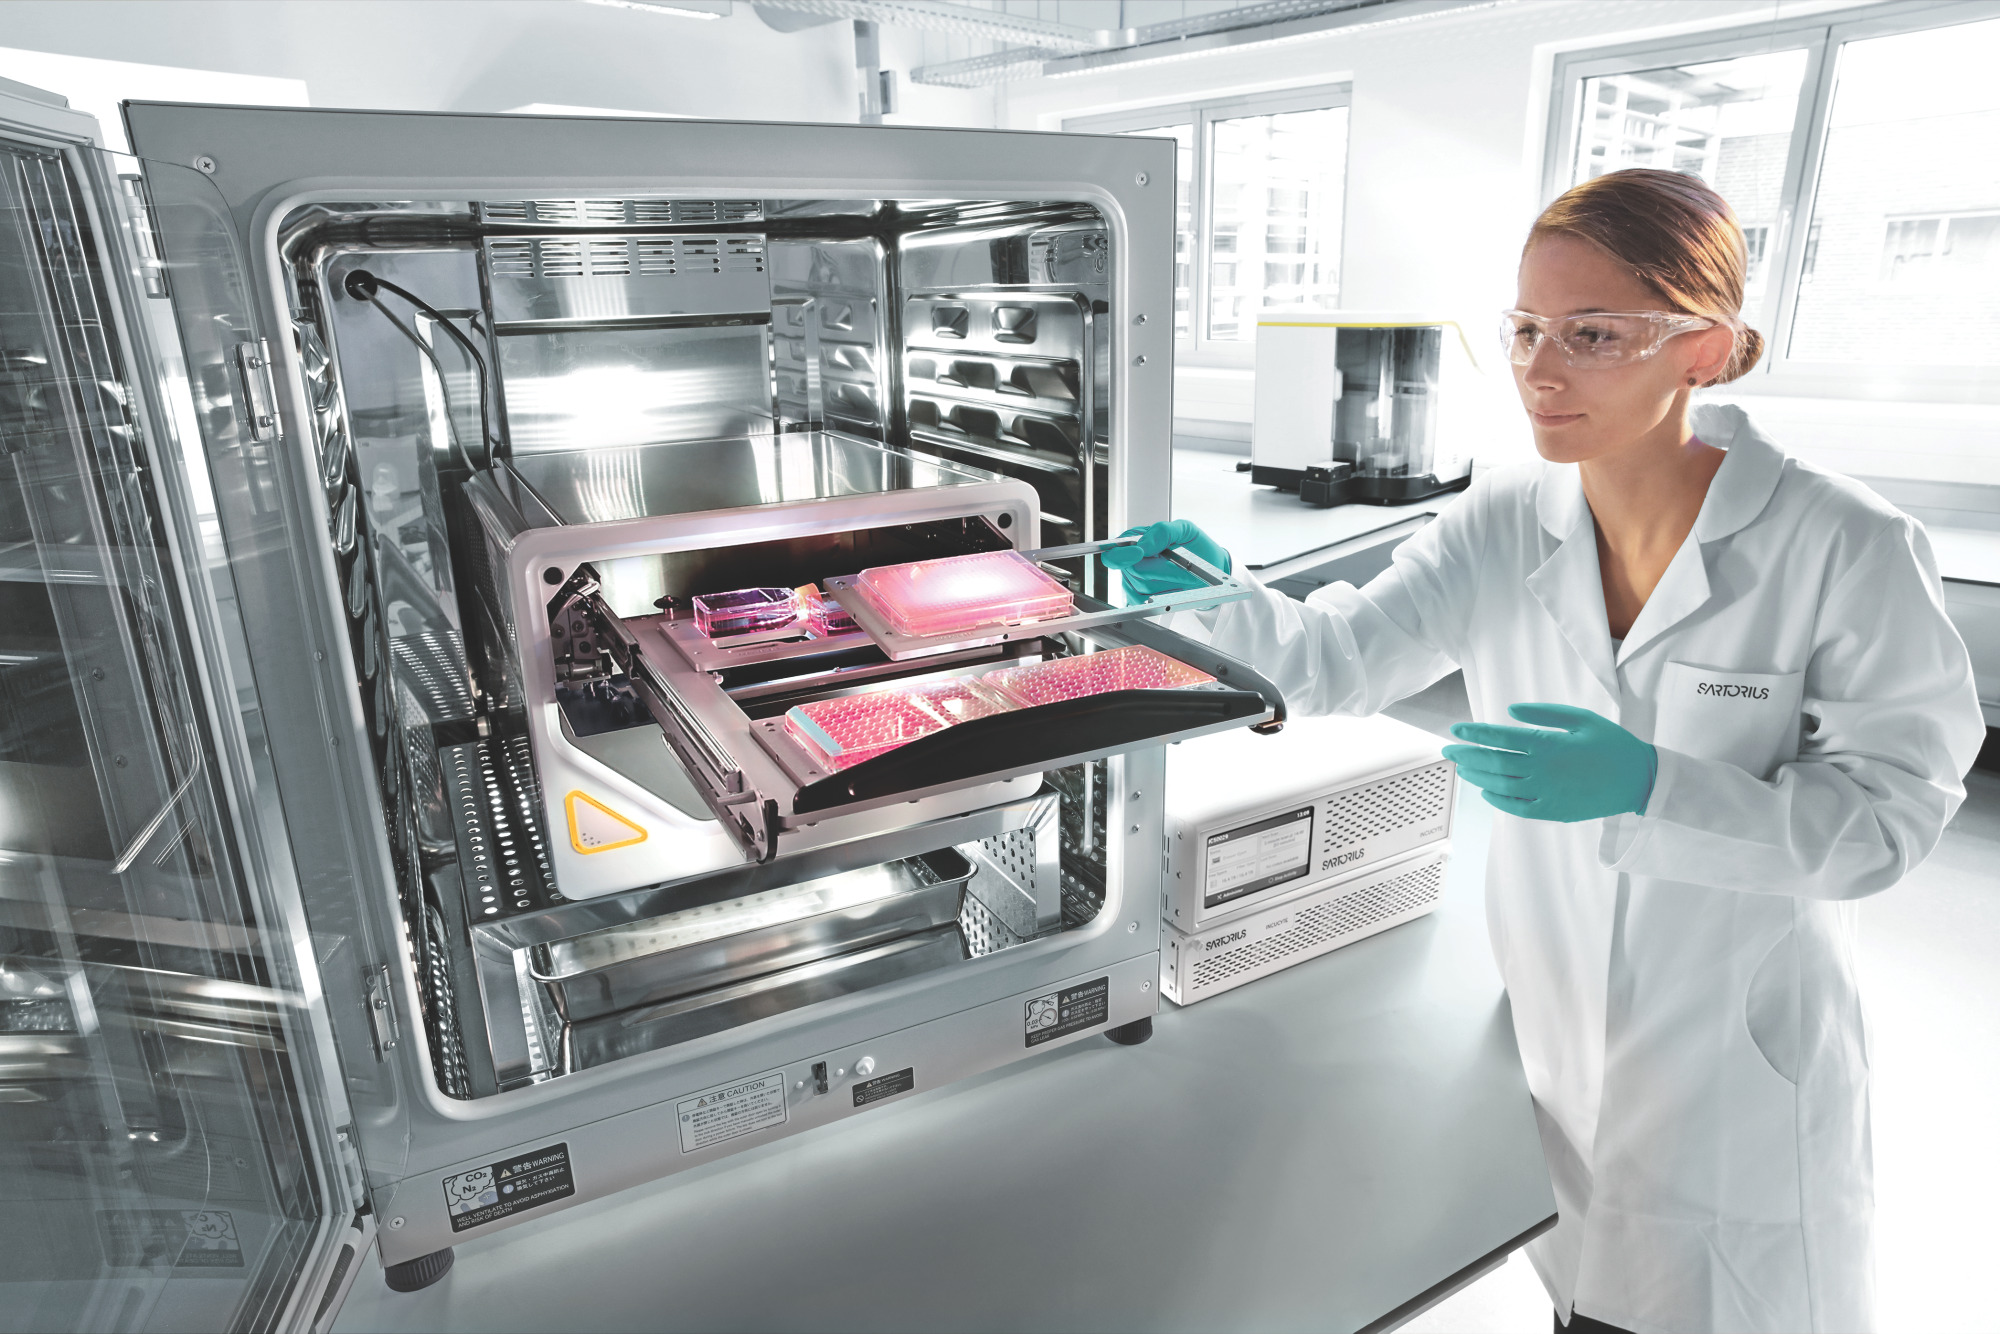 Sartorius to Advance Drug Discovery and Manufacturing with AI in Collaboration with NVIDIA